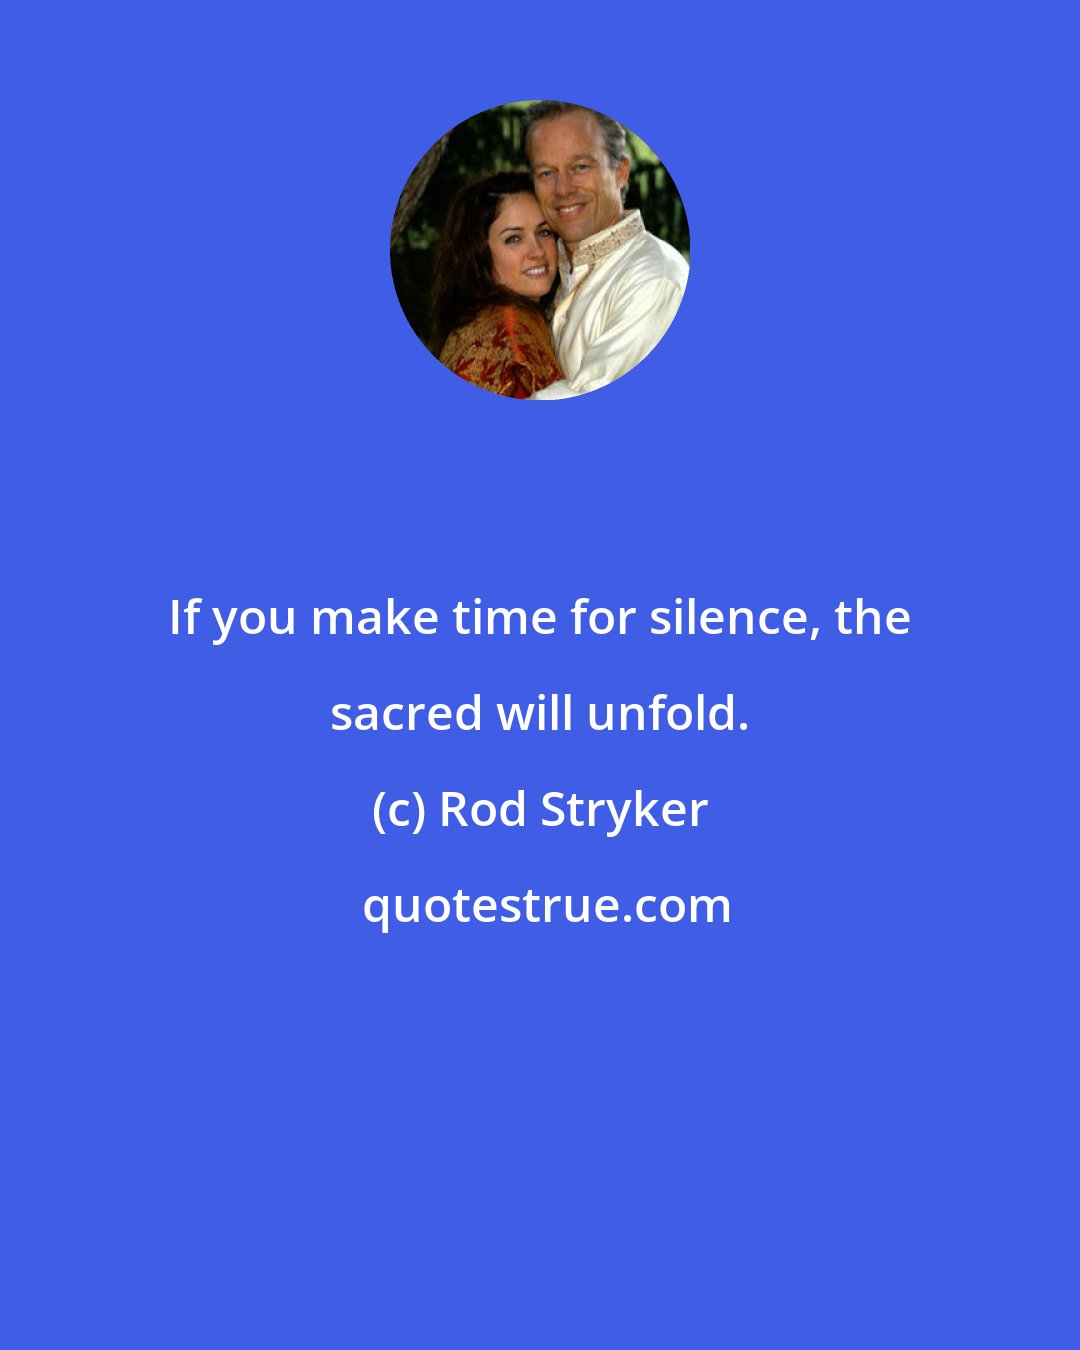 Rod Stryker: If you make time for silence, the sacred will unfold.